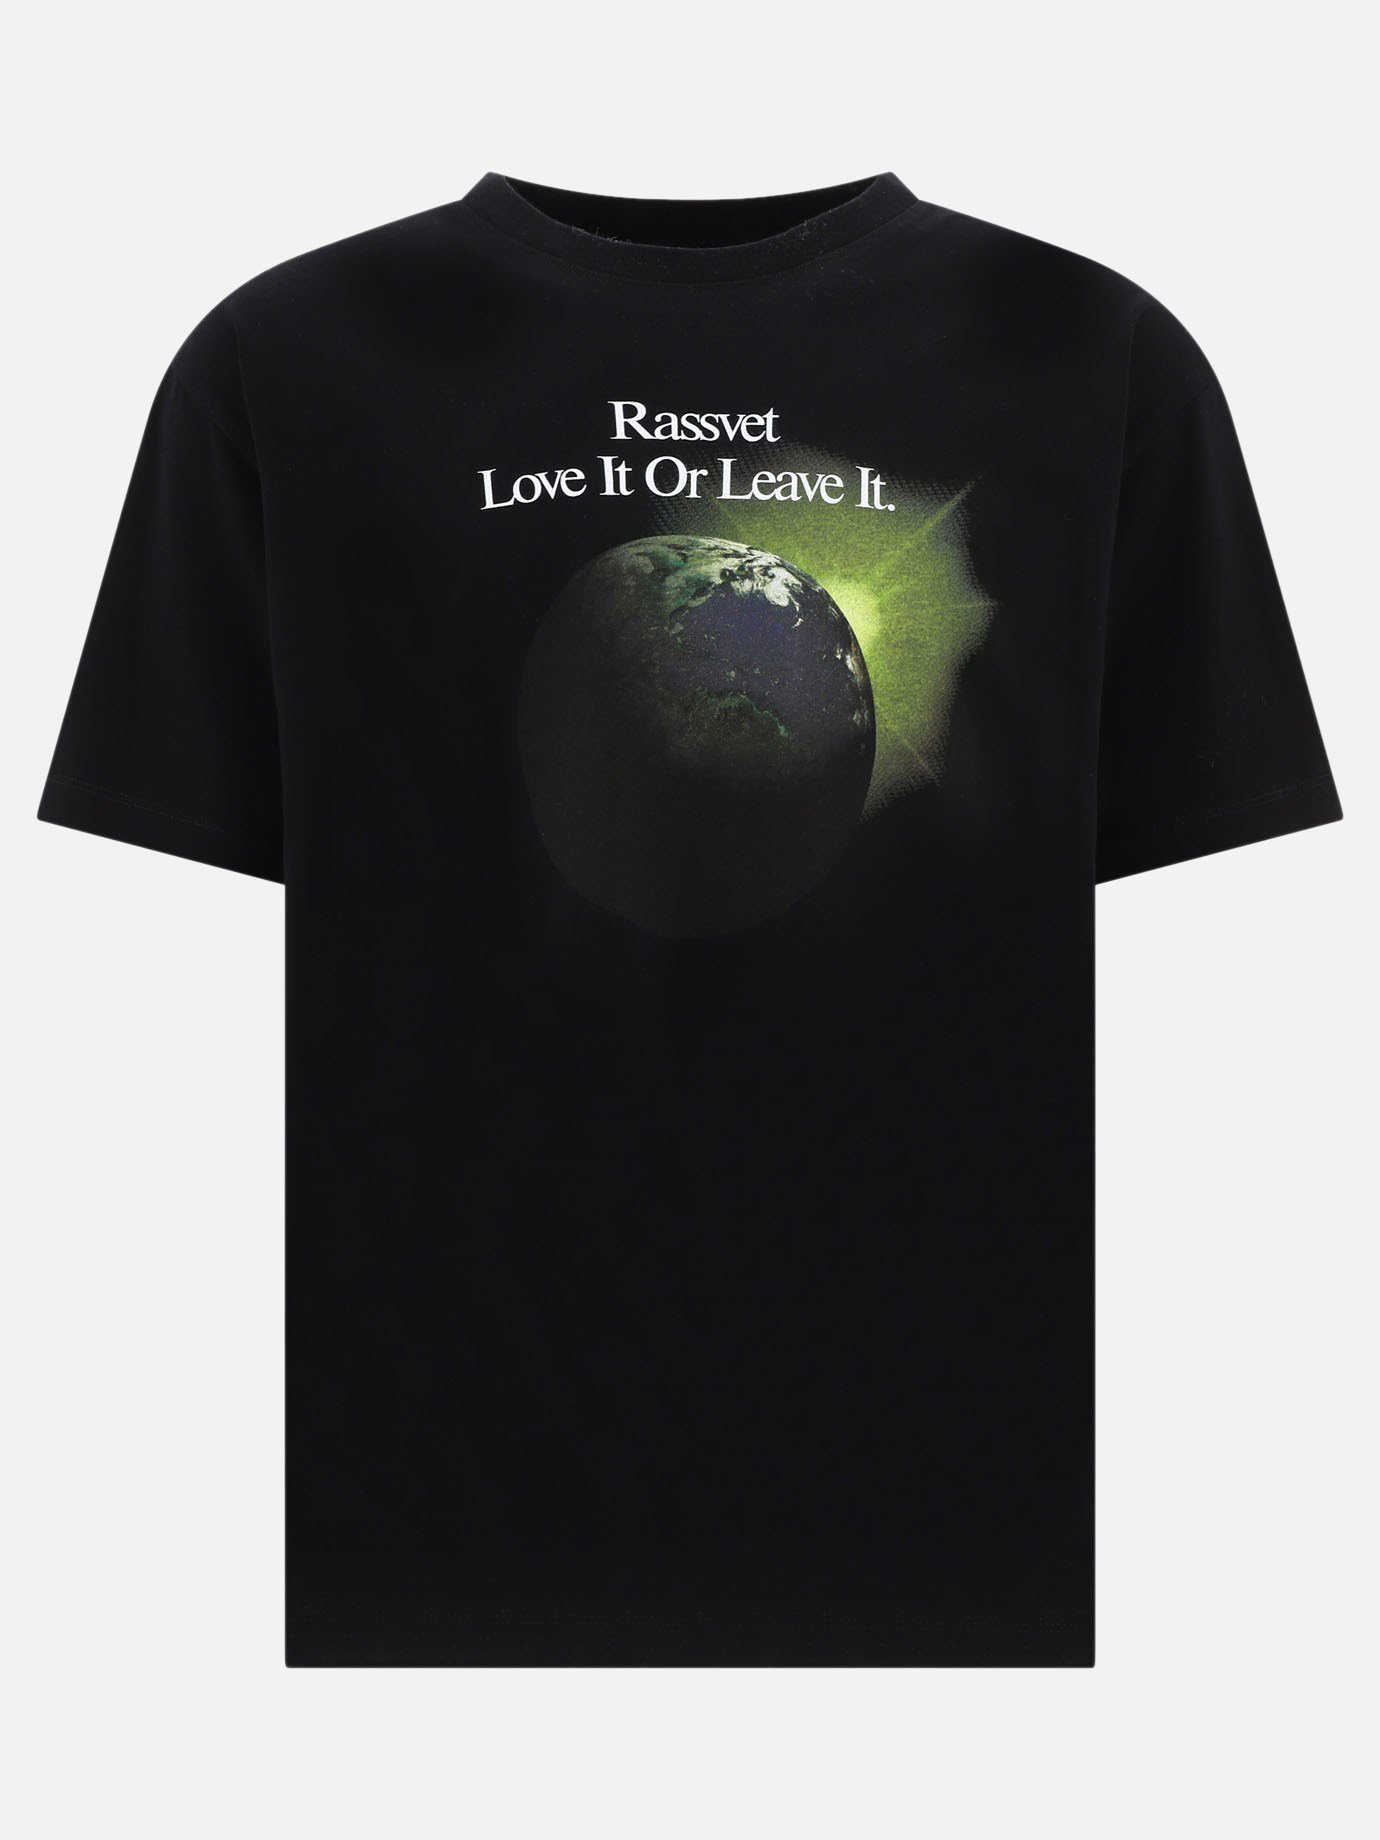  Love It Or Leave It  t-shirtby Paccbet - 5